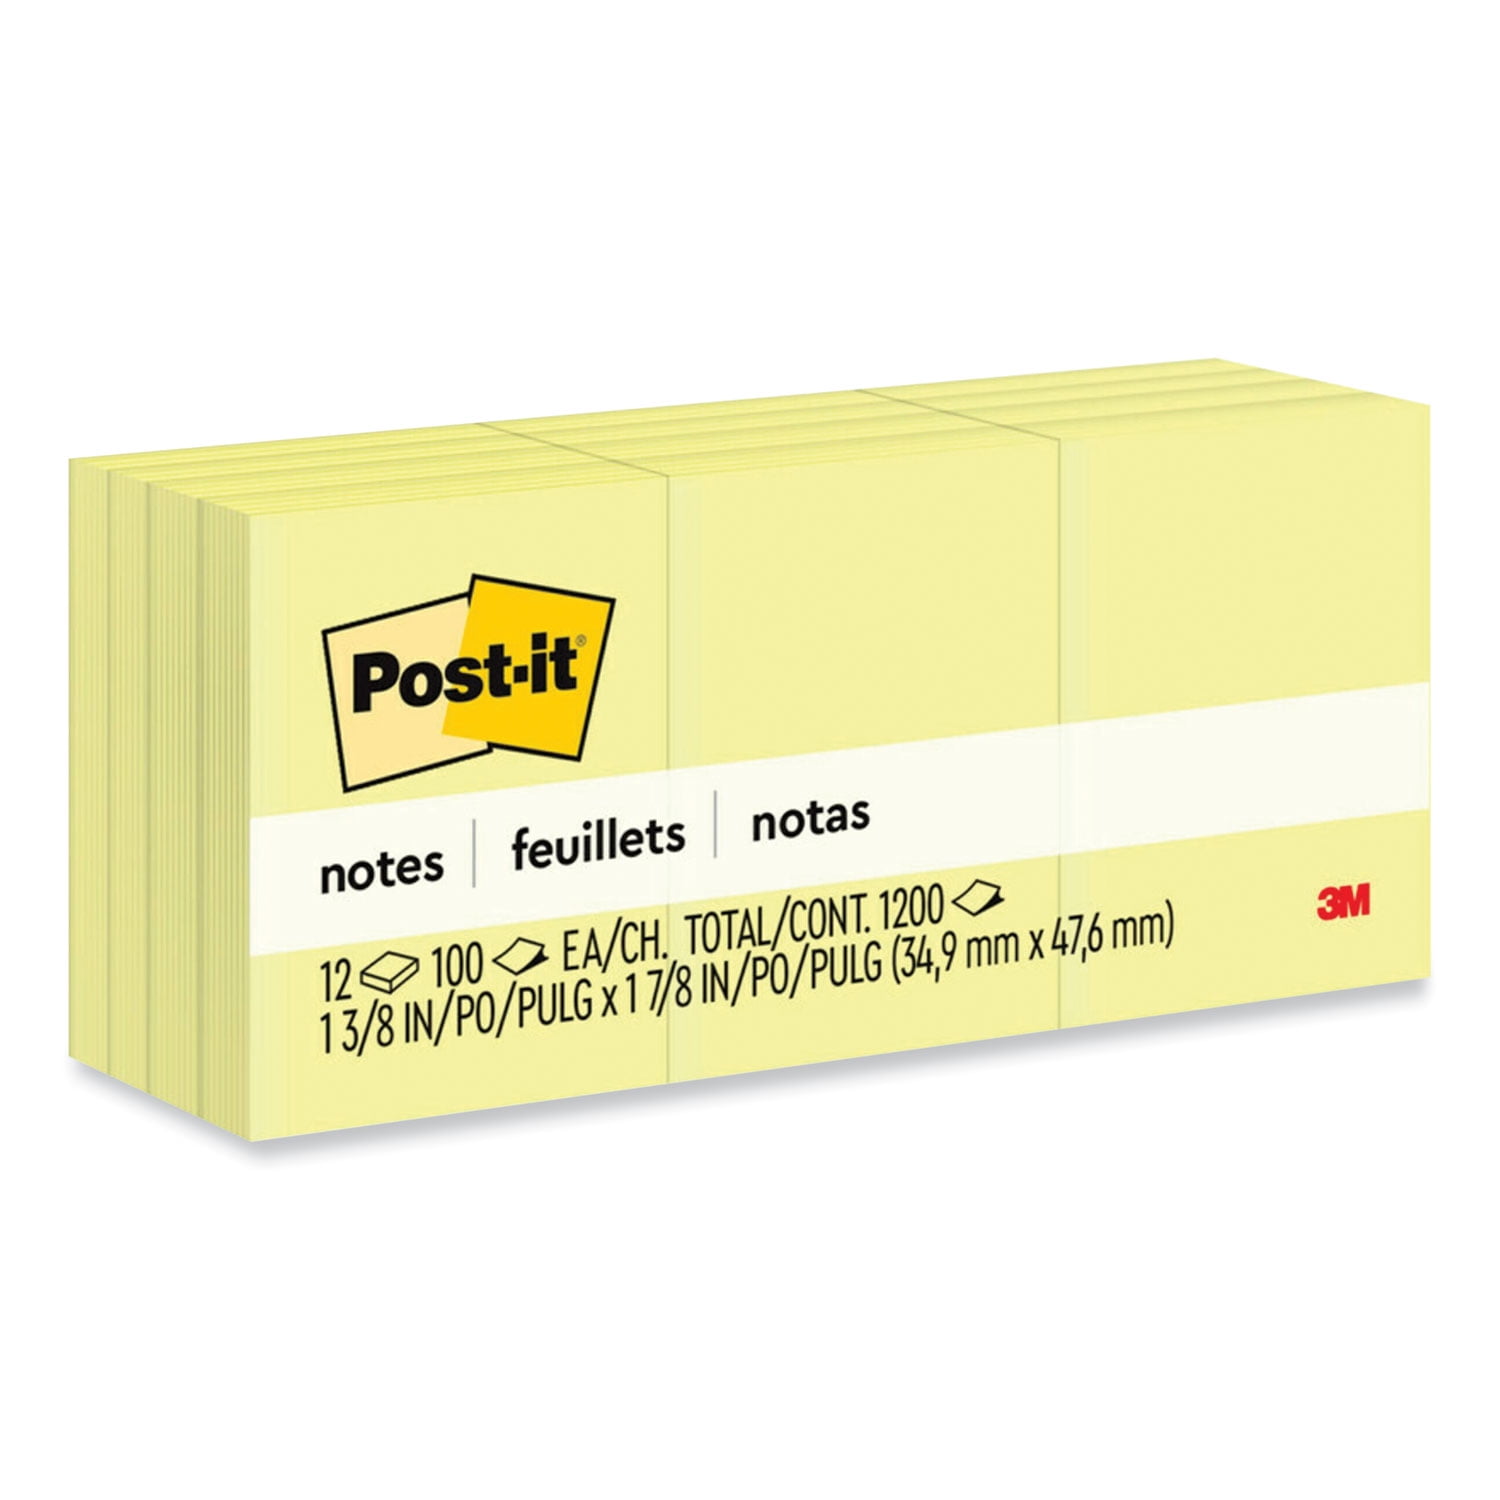 Original Pads in Canary Yellow 1 1/2 x 2 100-Sheet 12/Pack